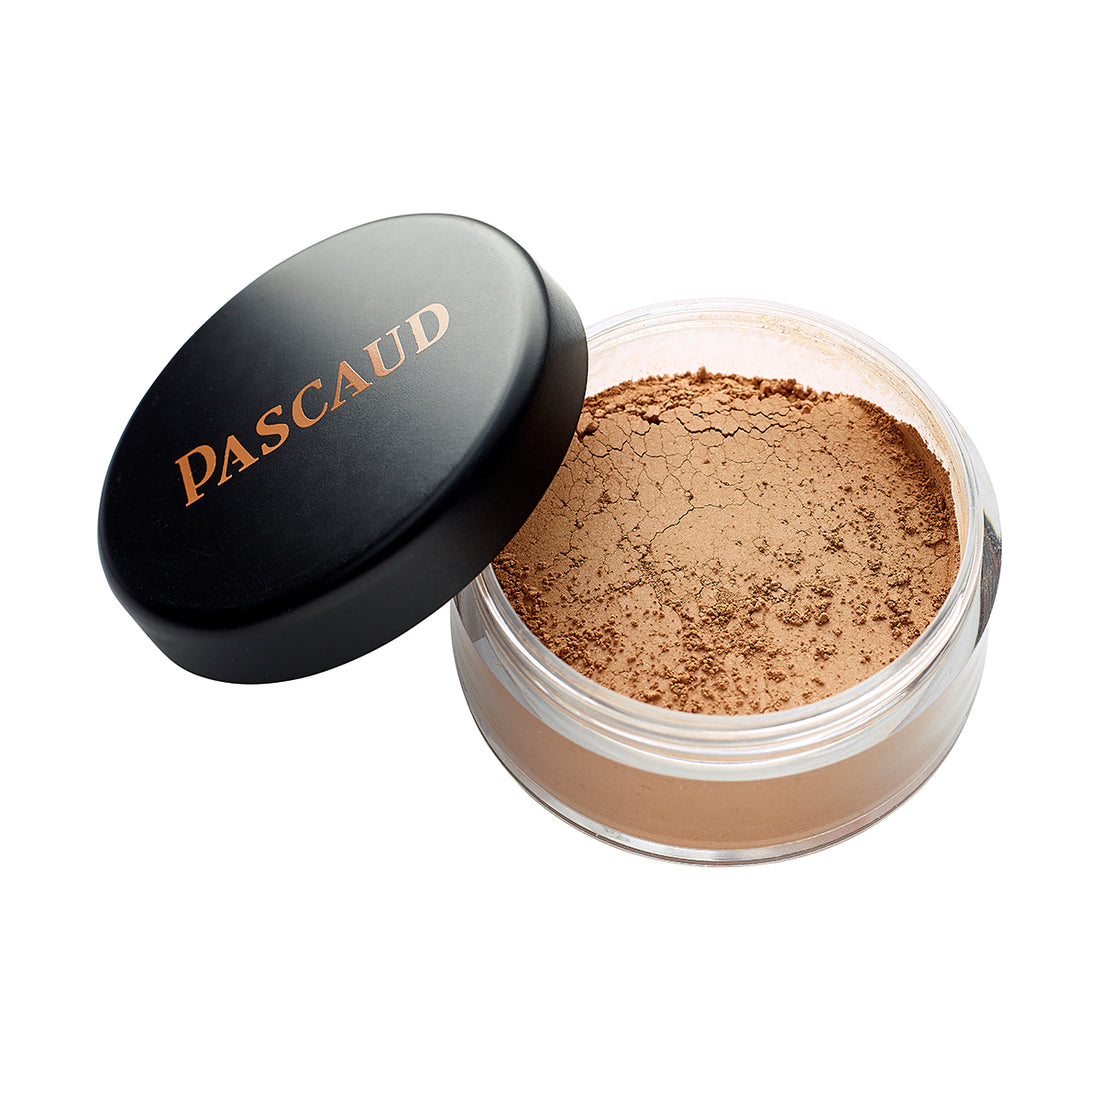 pascaud mineral foundation